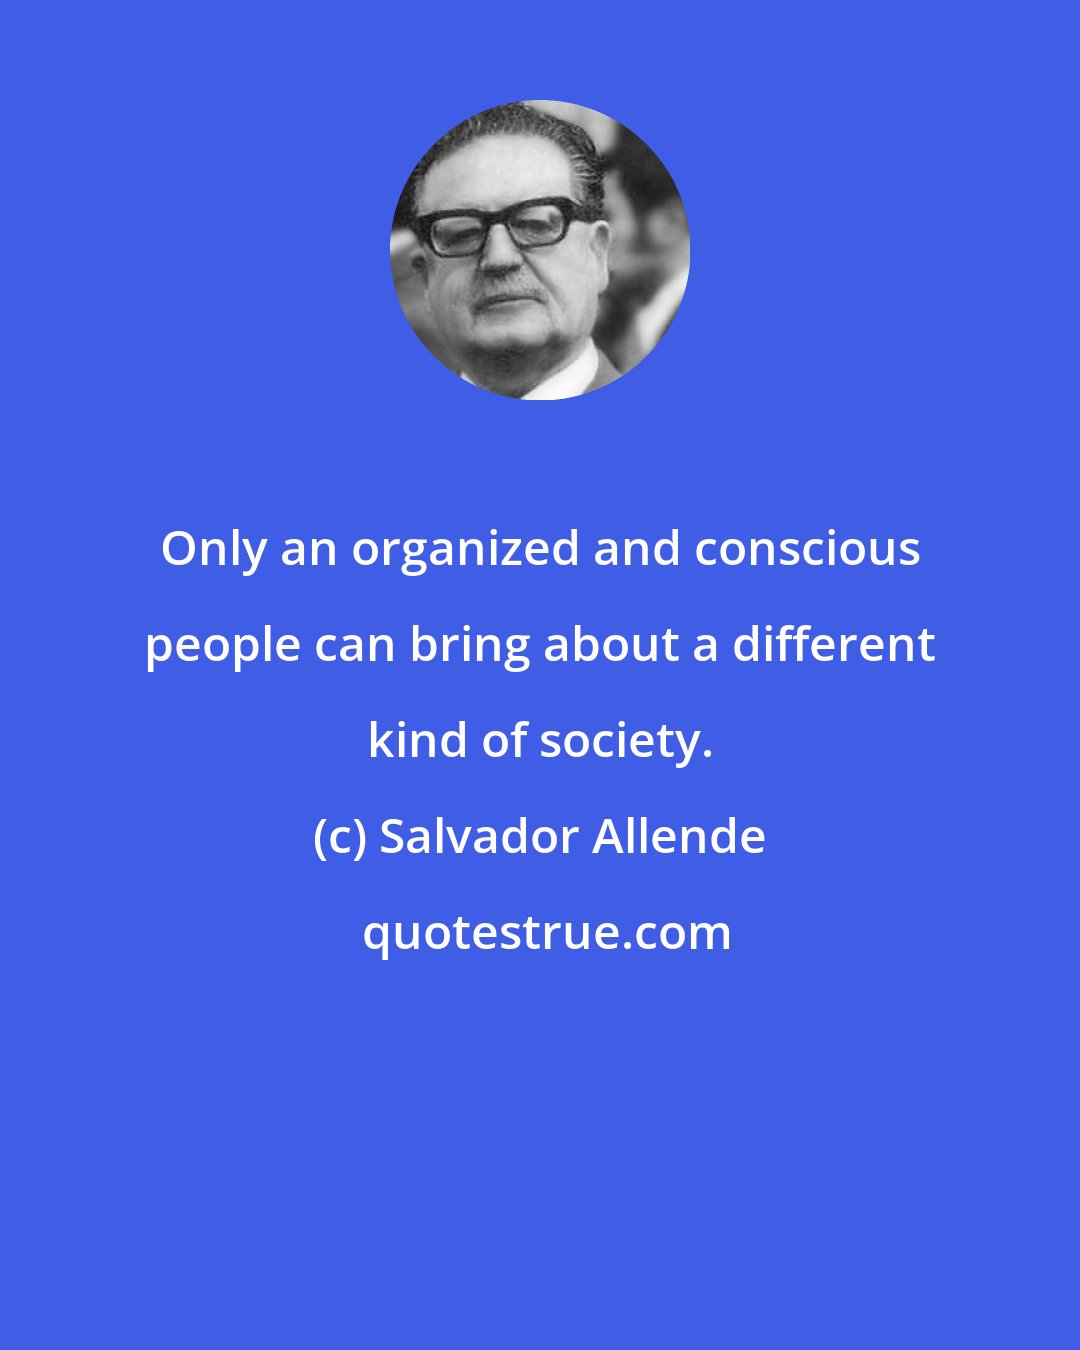 Salvador Allende: Only an organized and conscious people can bring about a different kind of society.